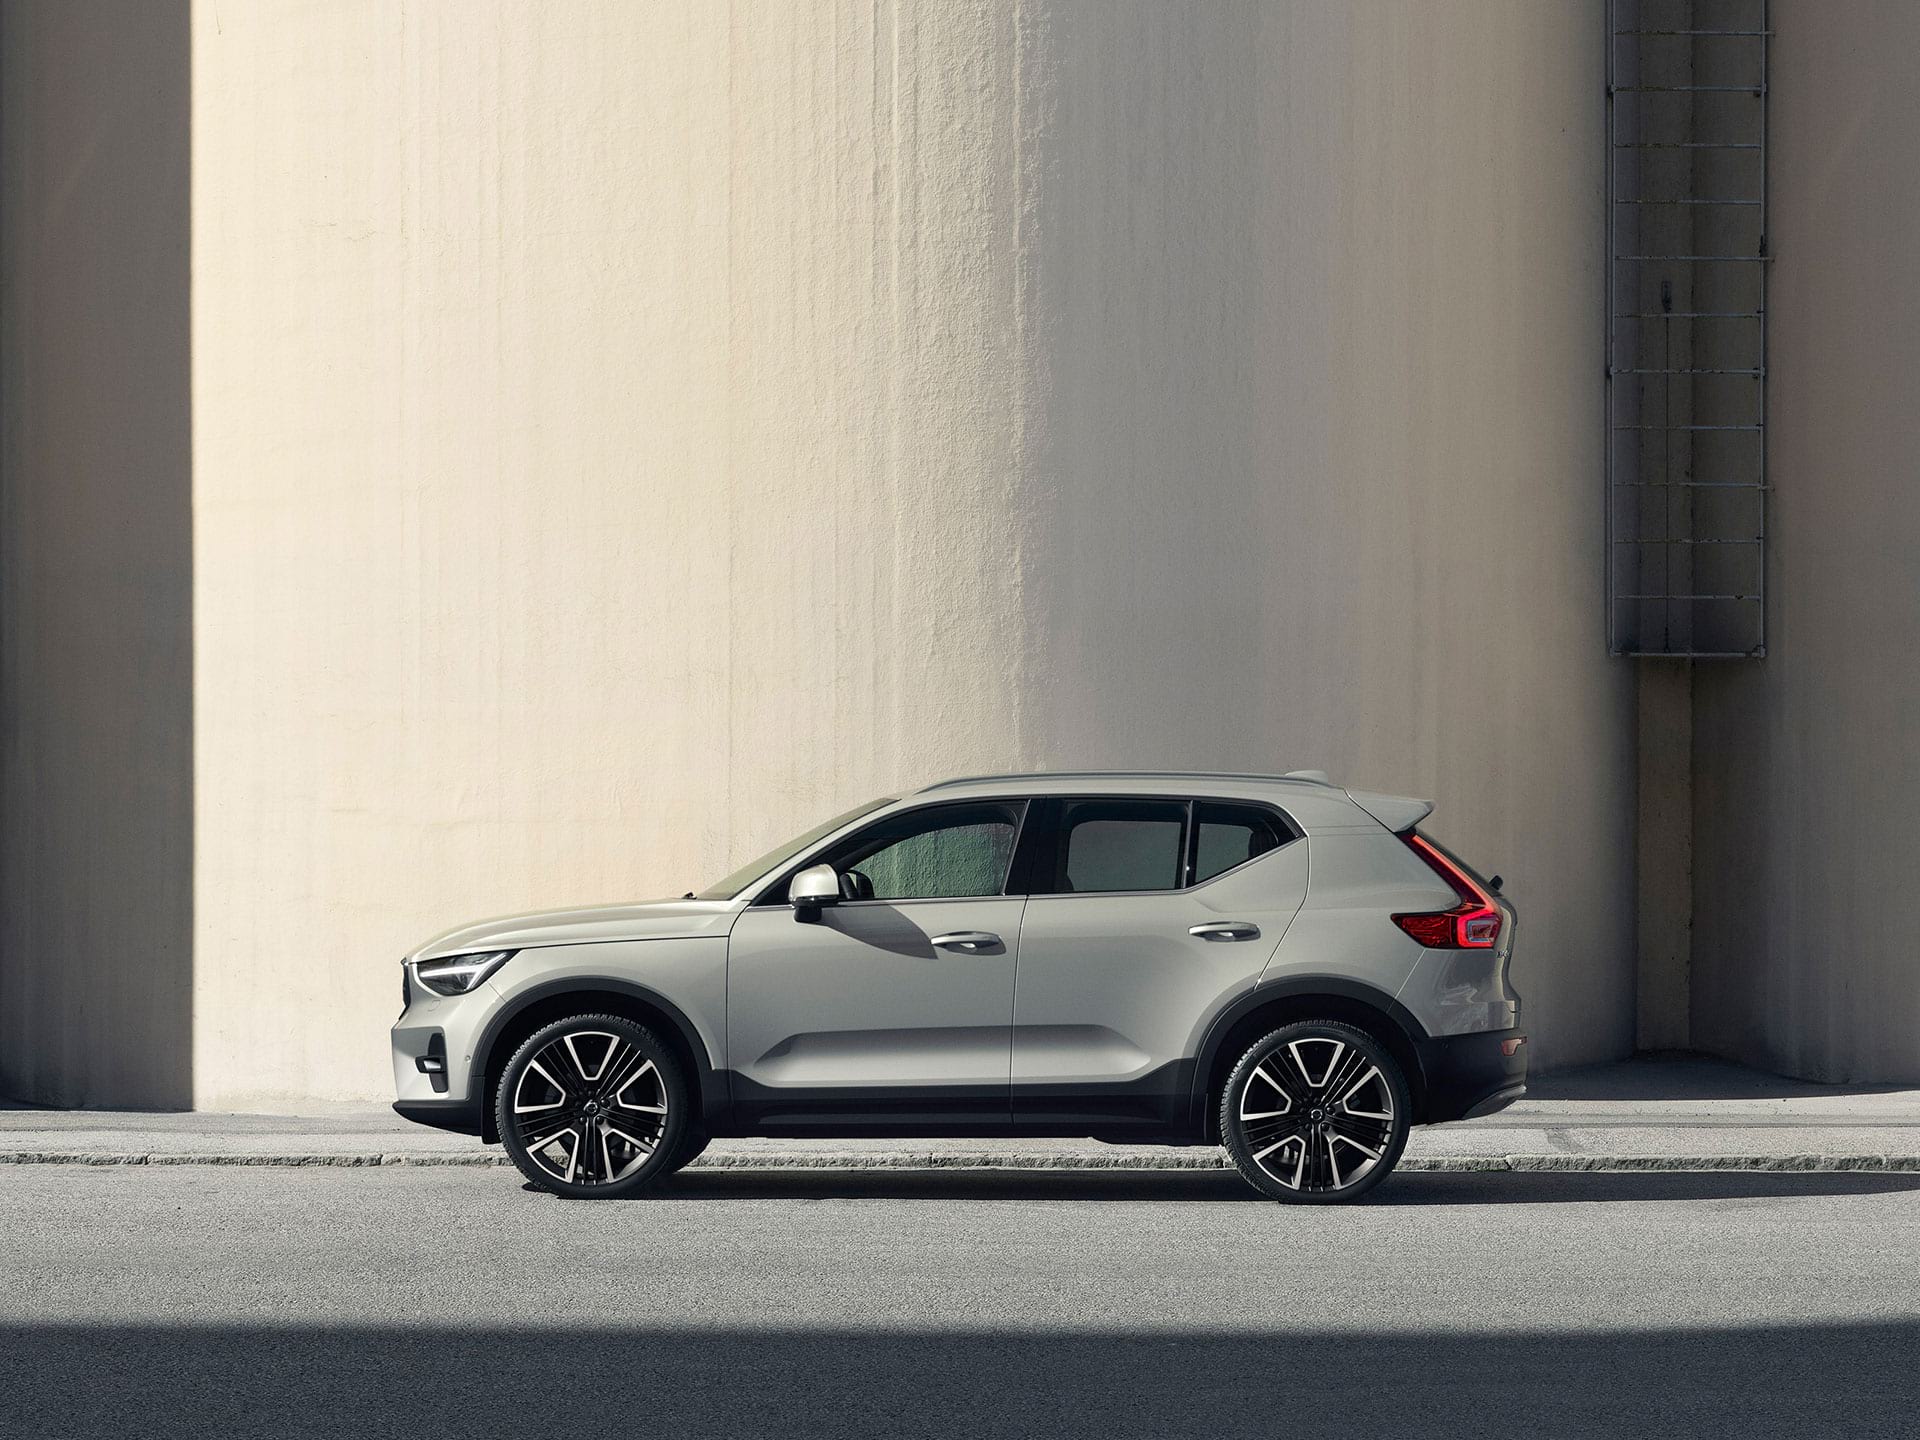 The side profile of a silver Volvo XC40 SUV.